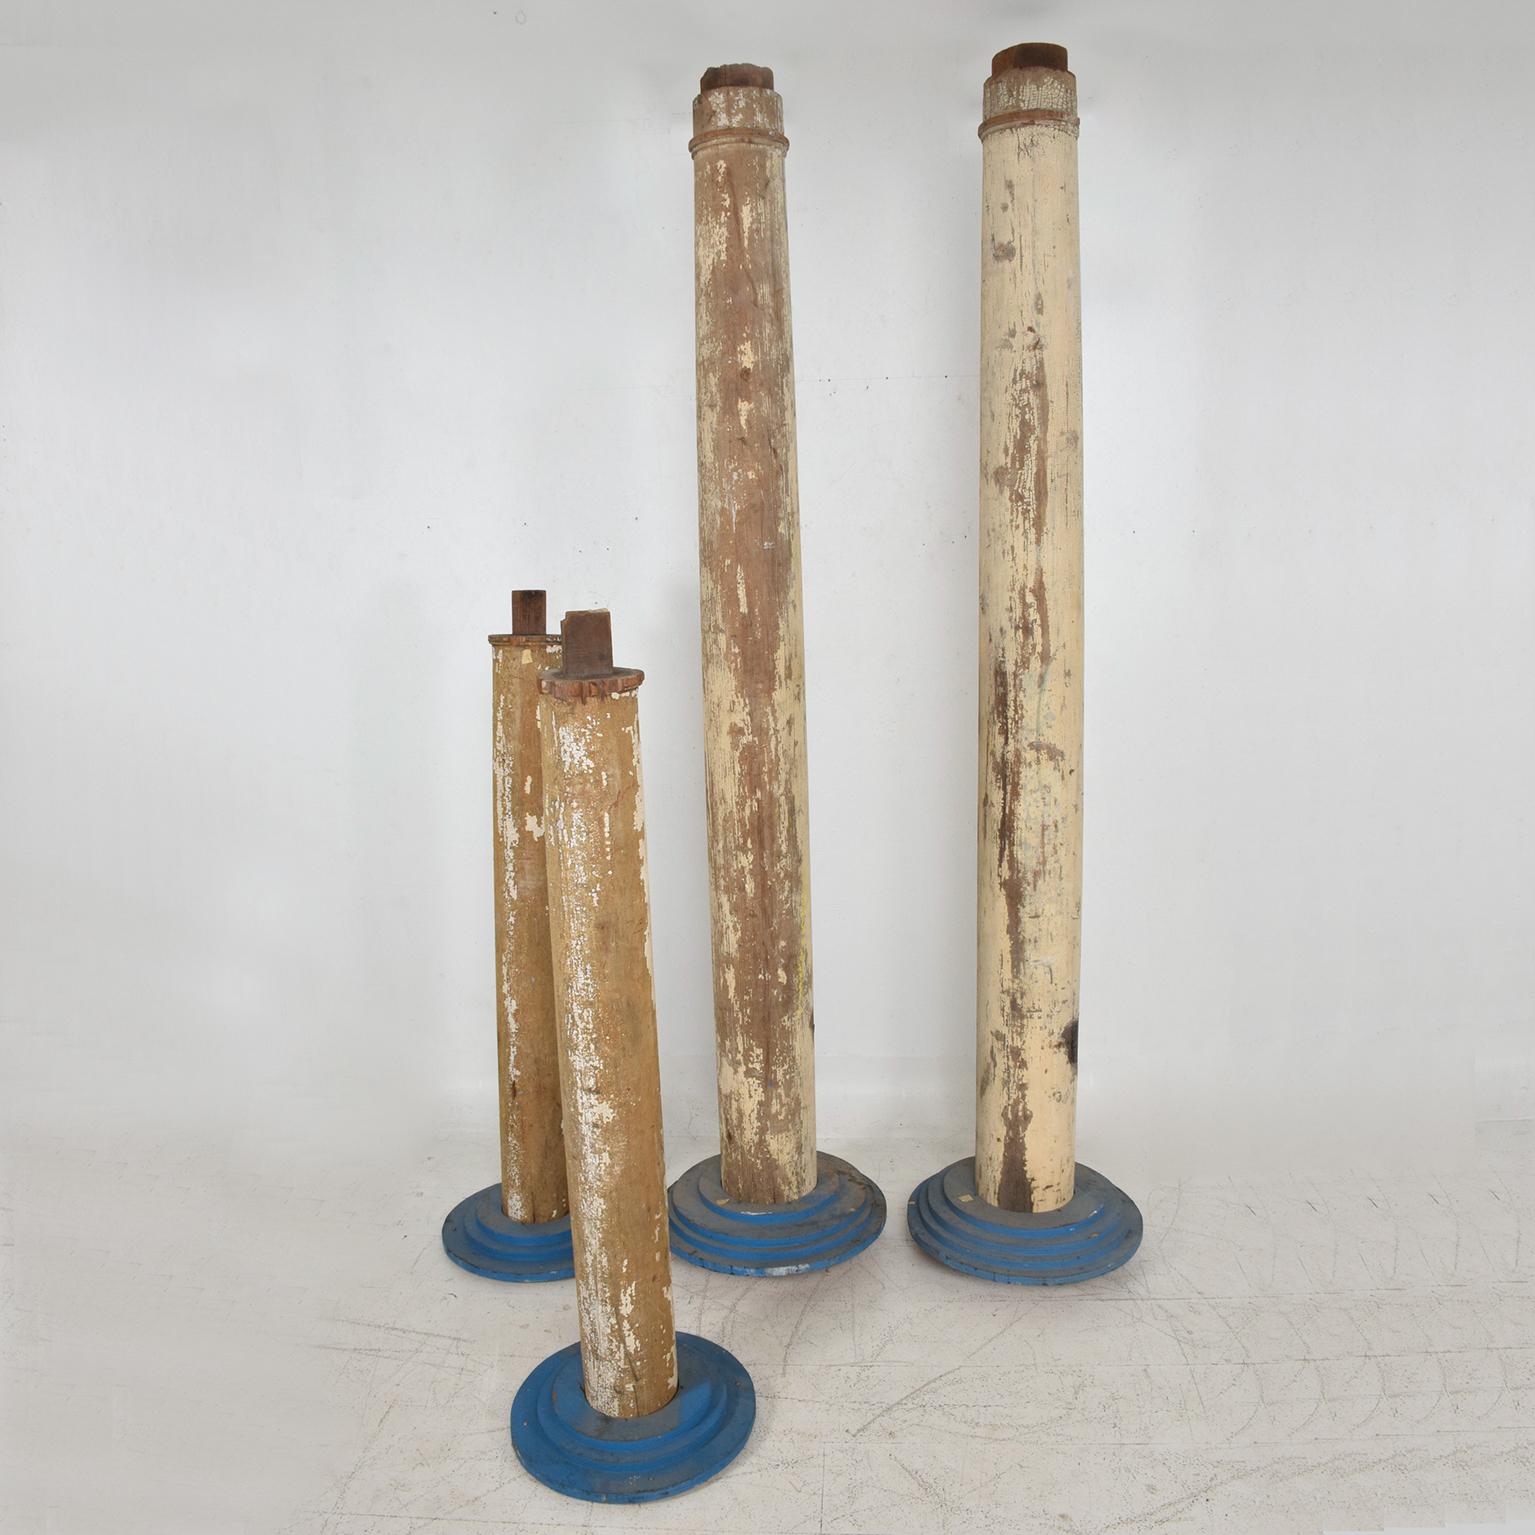 For your consideration a set of four architectural wood columns. 
Original paint and patina. 
Dimensions: 
Tall: 88 1/2